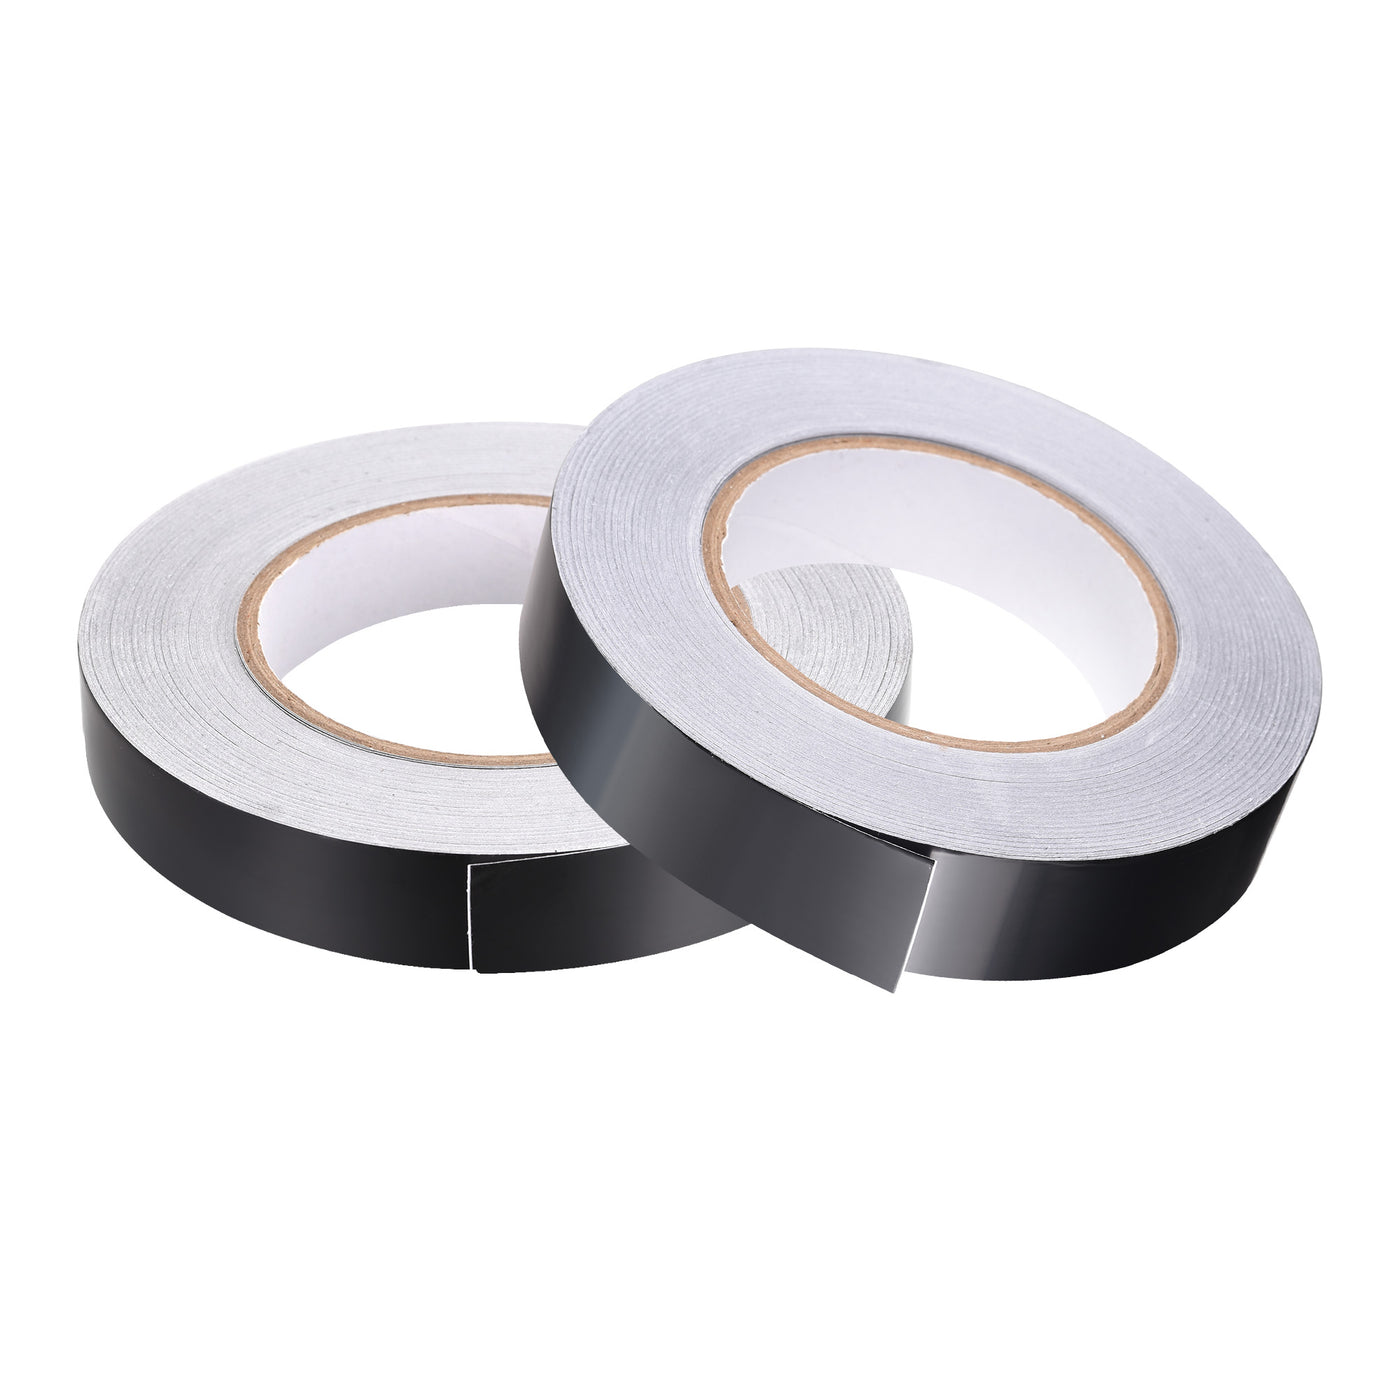 uxcell Uxcell 20mm Aluminum Foil Tape for HVAC, Patching Hot and Blocking Light 50m/164ft 2pcs